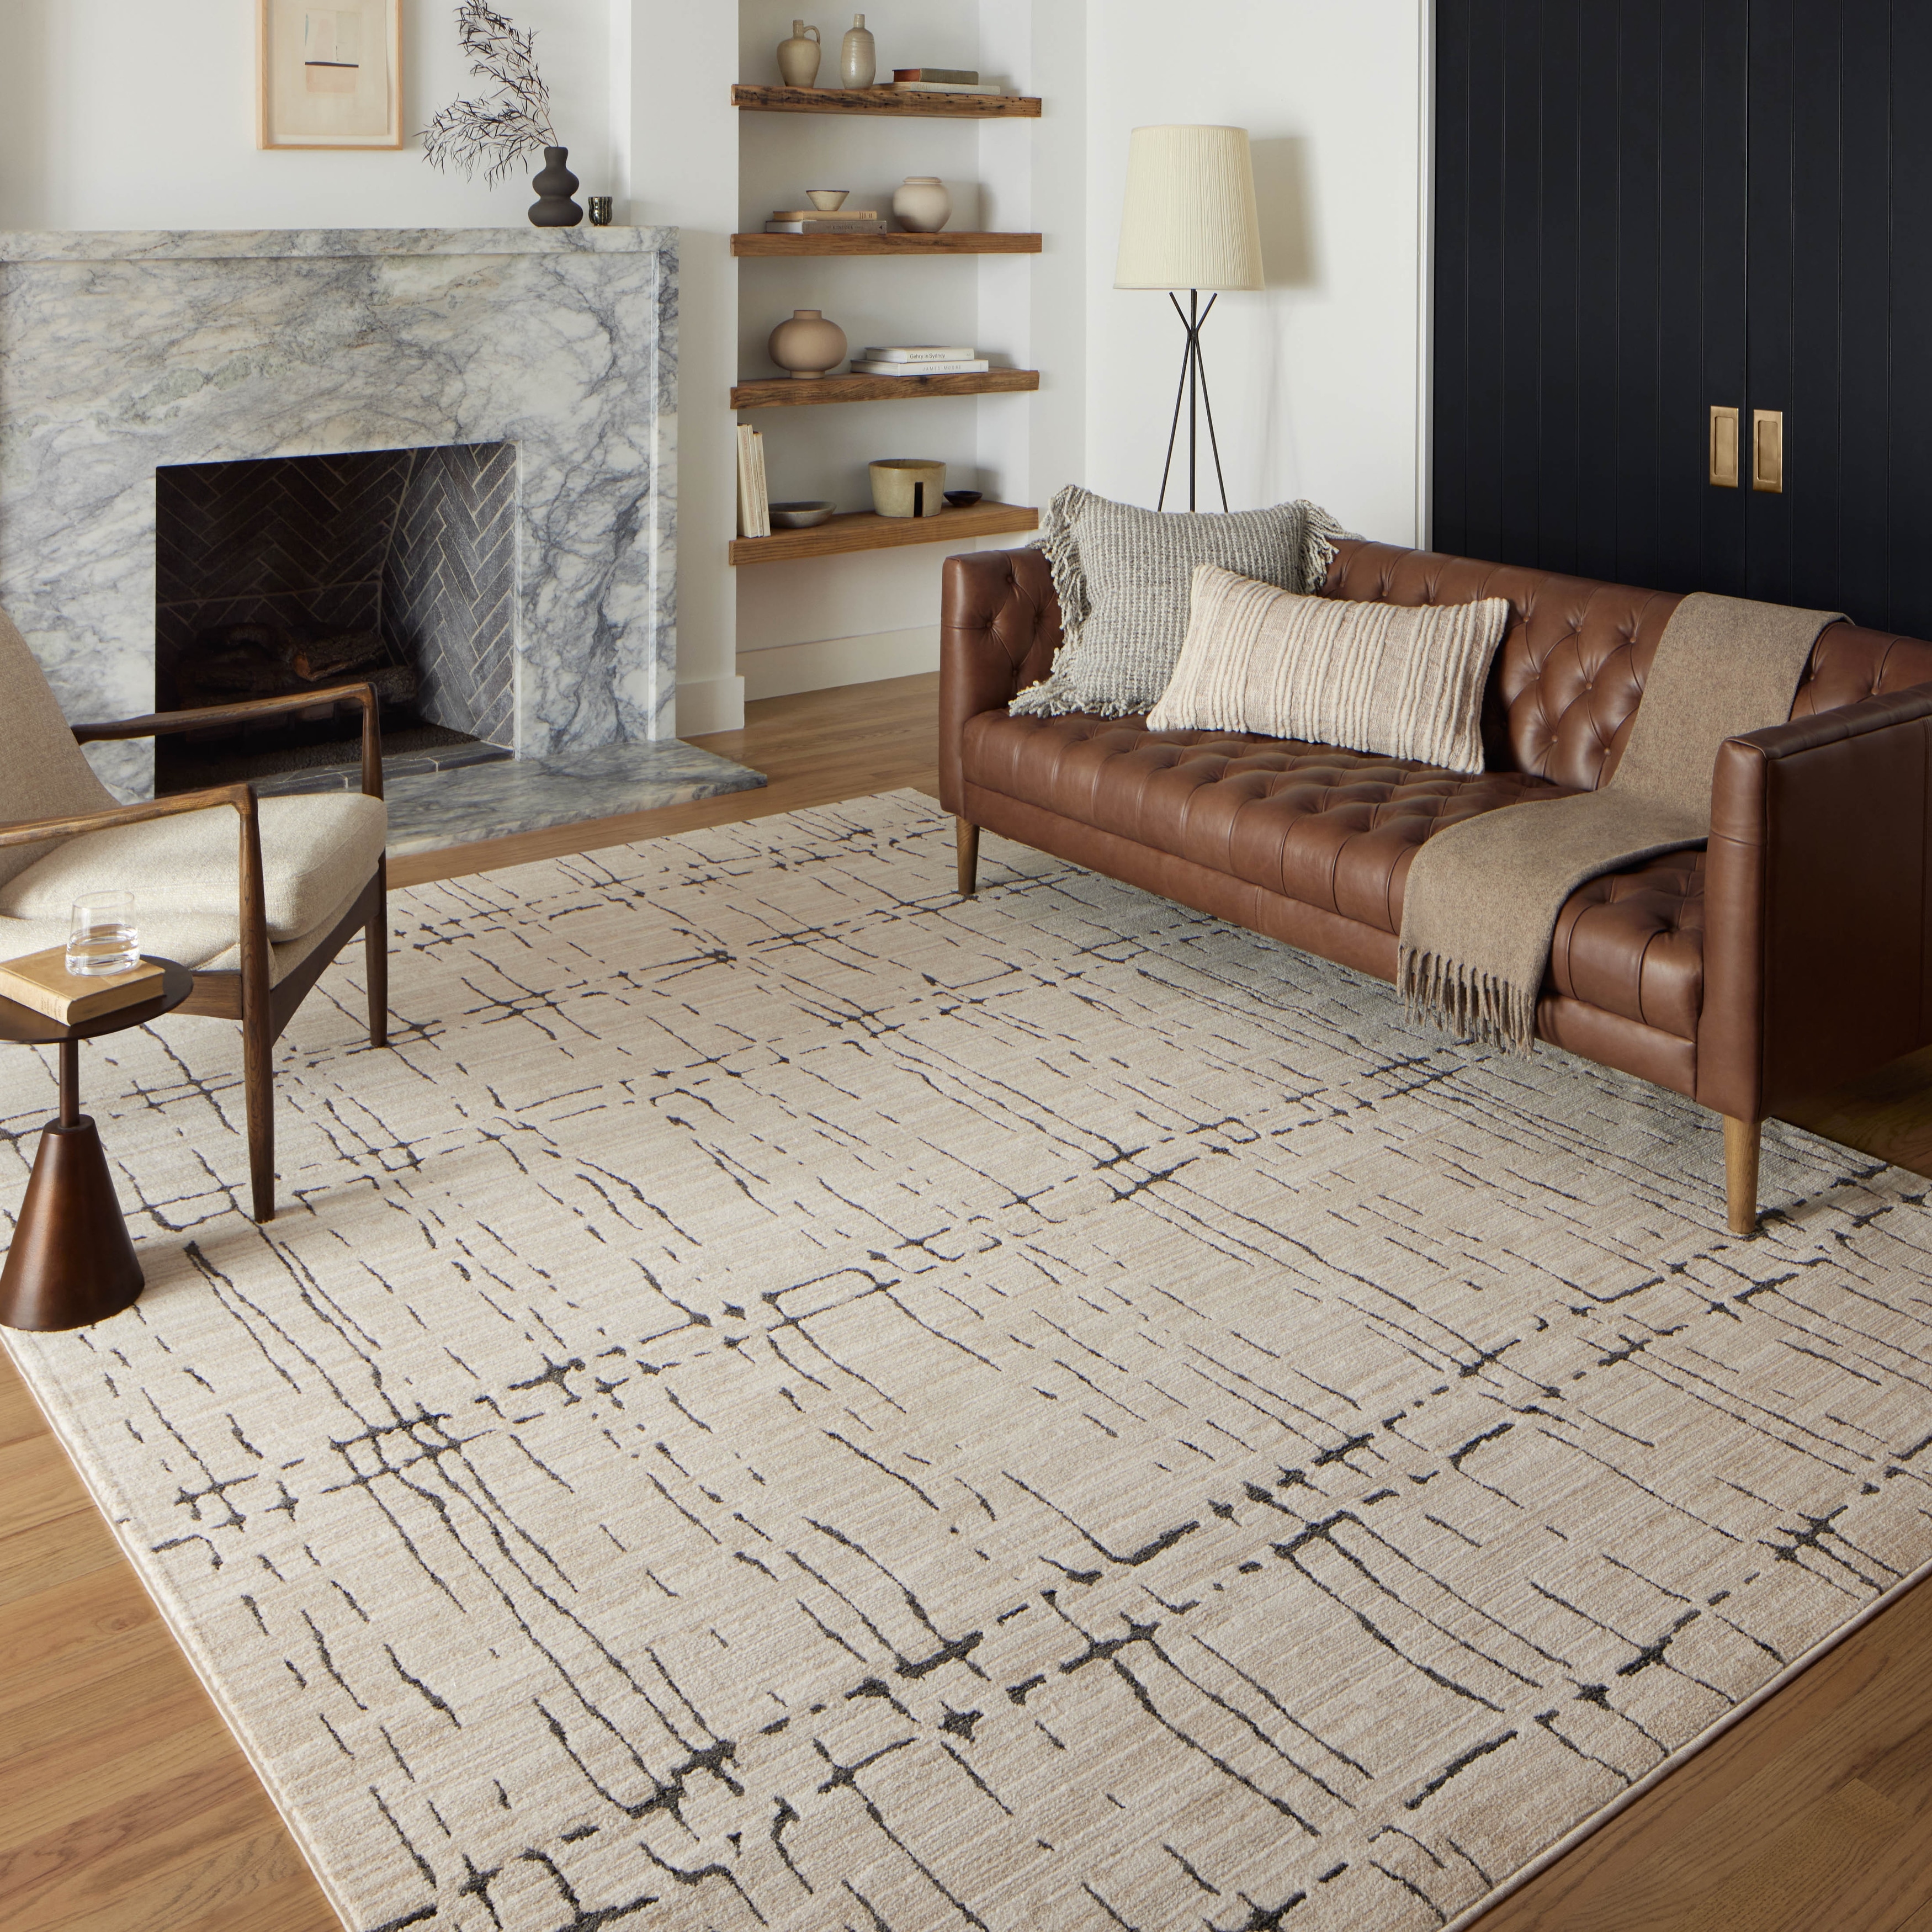 https://ak1.ostkcdn.com/images/products/is/images/direct/e44e48d77692bbcde7c5a3260bbf20bbab65dc37/Alexander-Home-Harrison-Industrial-Check-Area-Rug.jpg